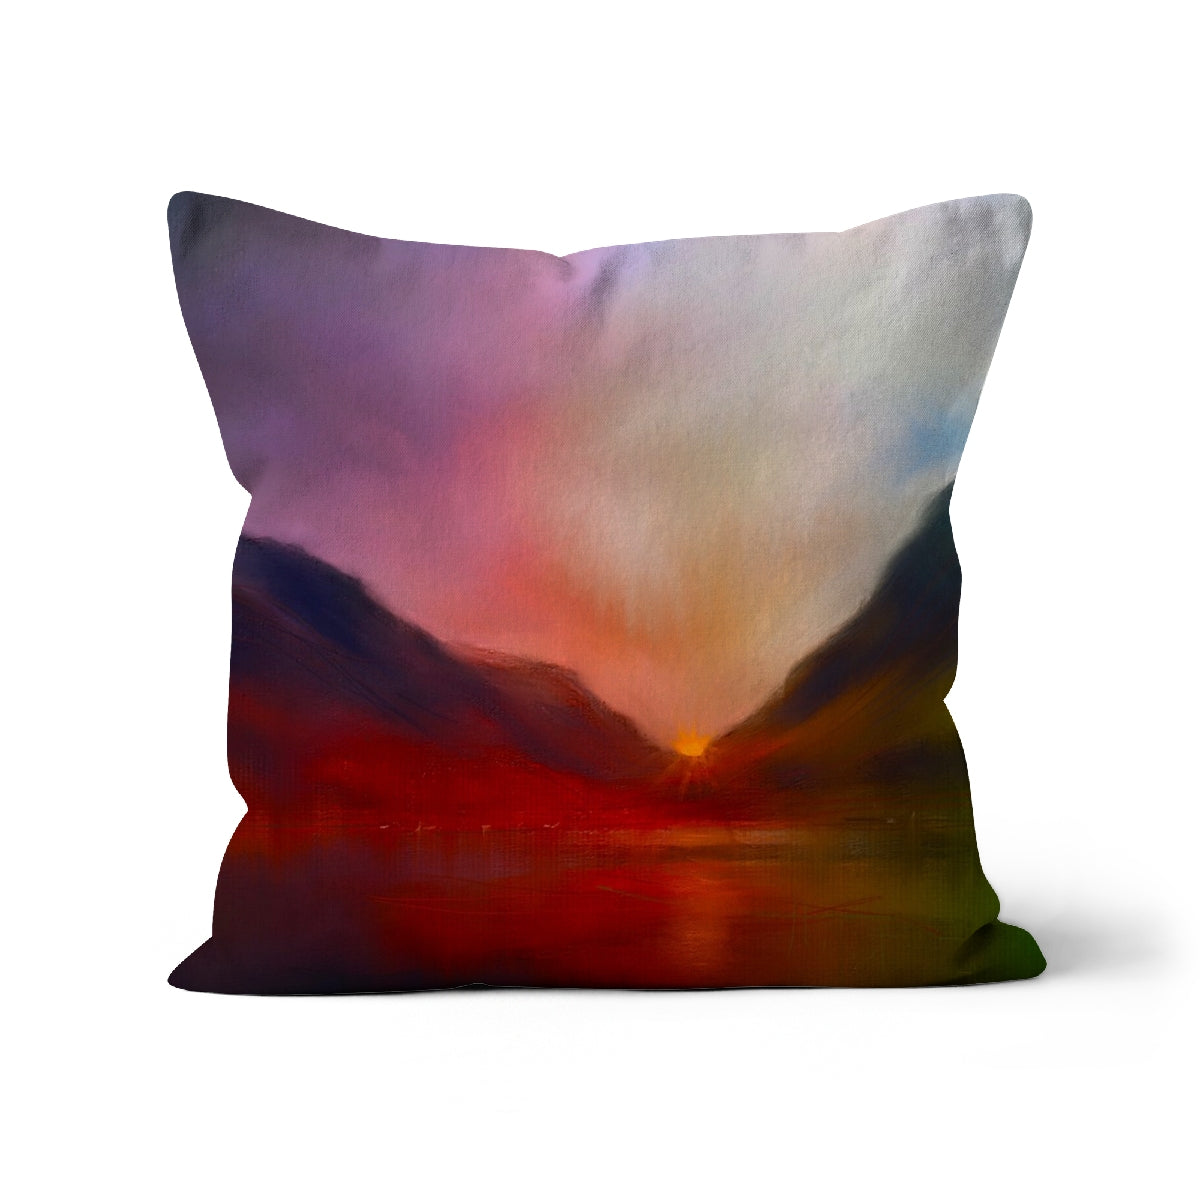 Glencoe Sunset Art Gifts Cushion-Cushions-Glencoe Art Gallery-Faux Suede-12"x12"-Paintings, Prints, Homeware, Art Gifts From Scotland By Scottish Artist Kevin Hunter